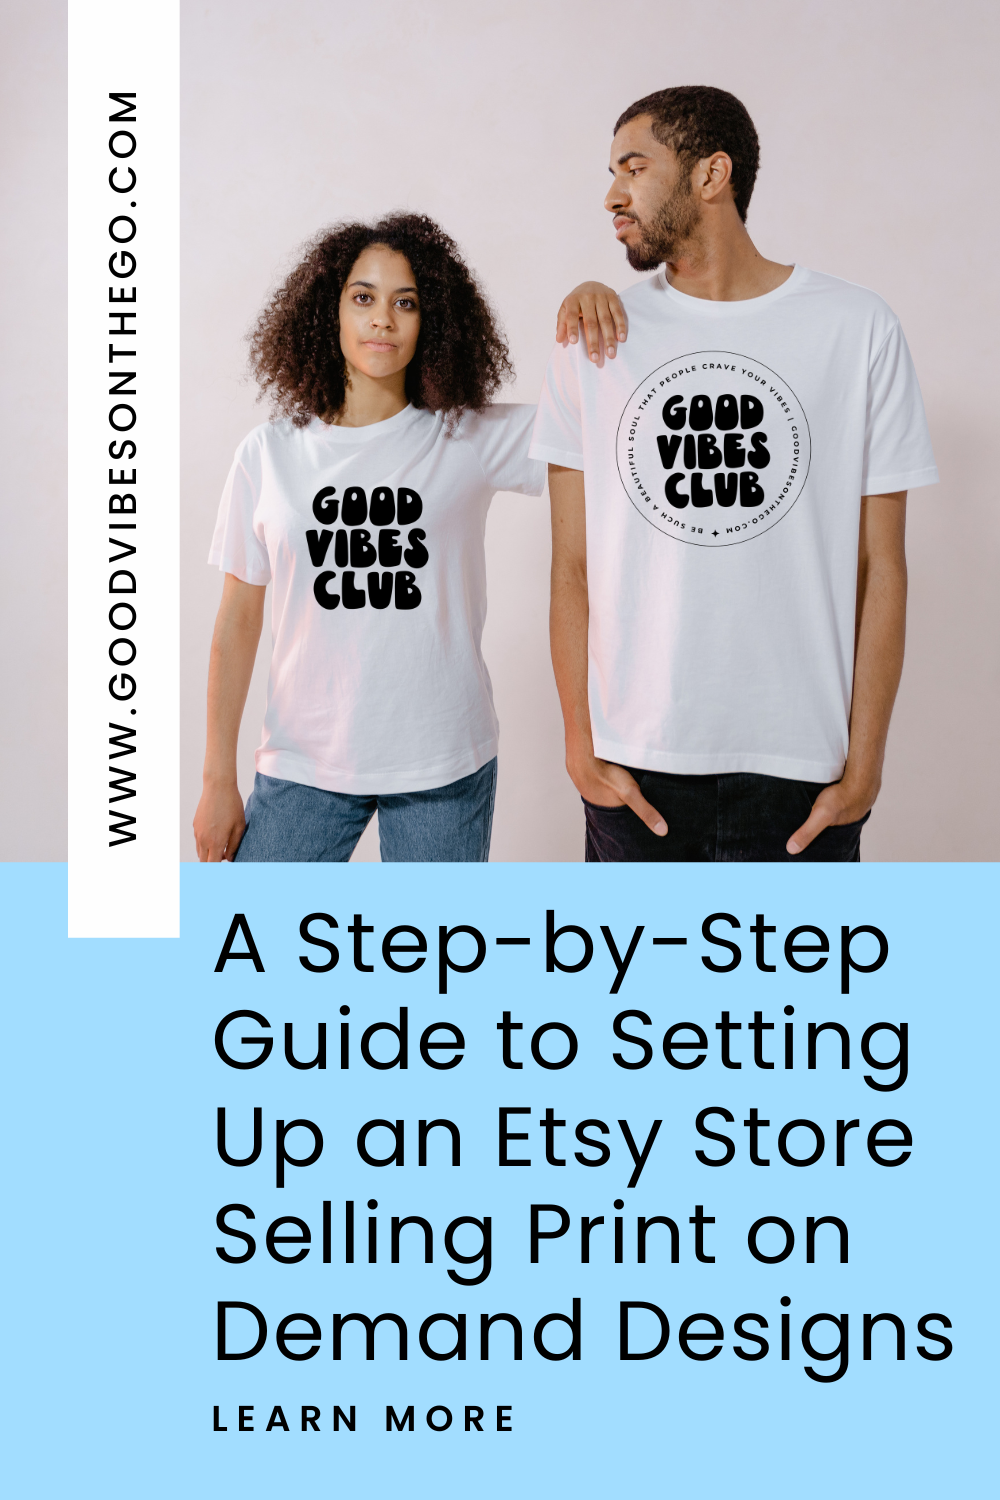 Unleashing Your Creativity: A Step-by-Step Guide to Setting Up an Etsy Store Selling Print on Demand Designs